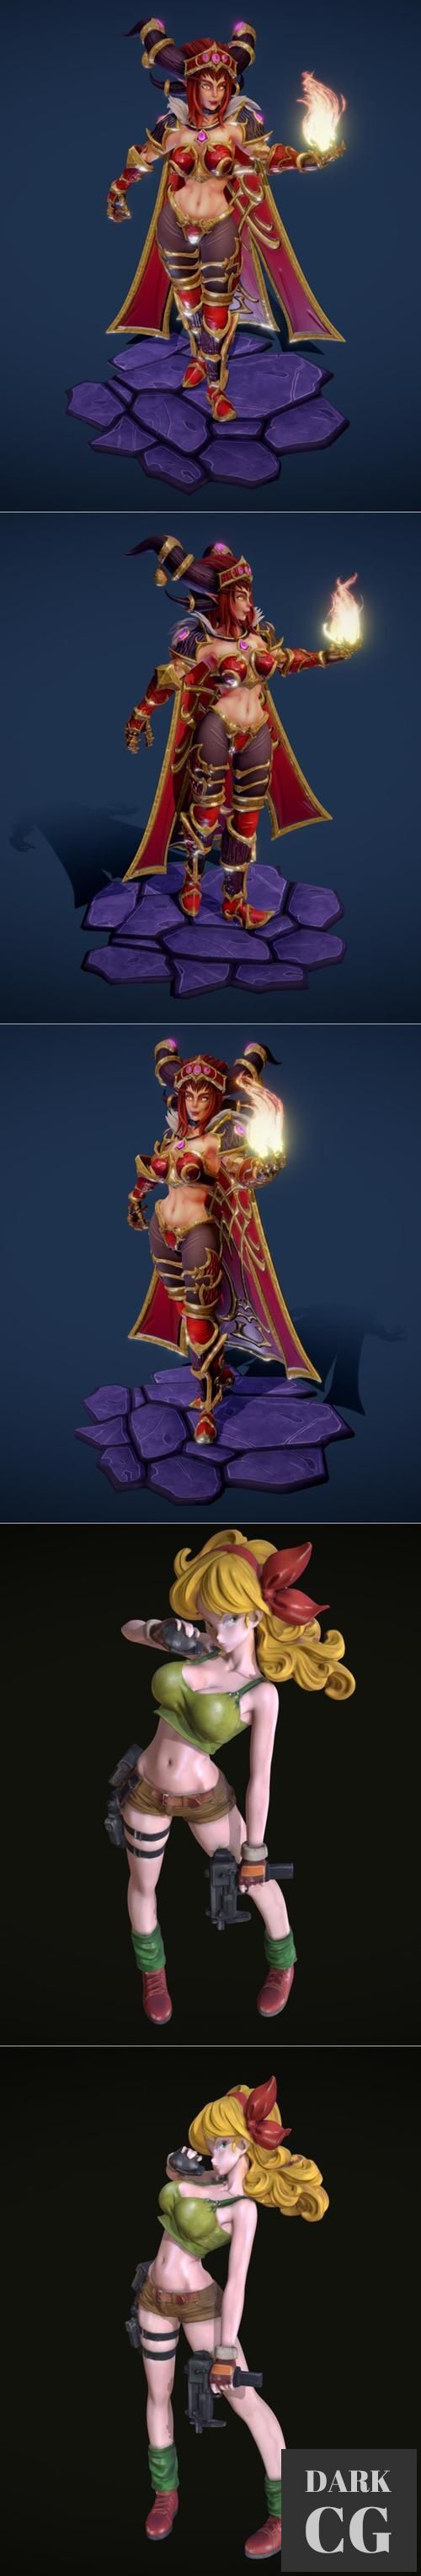 Alexstrasza from World Of Warcraft Fan Art and Dragonball Lunchi – 3D Print